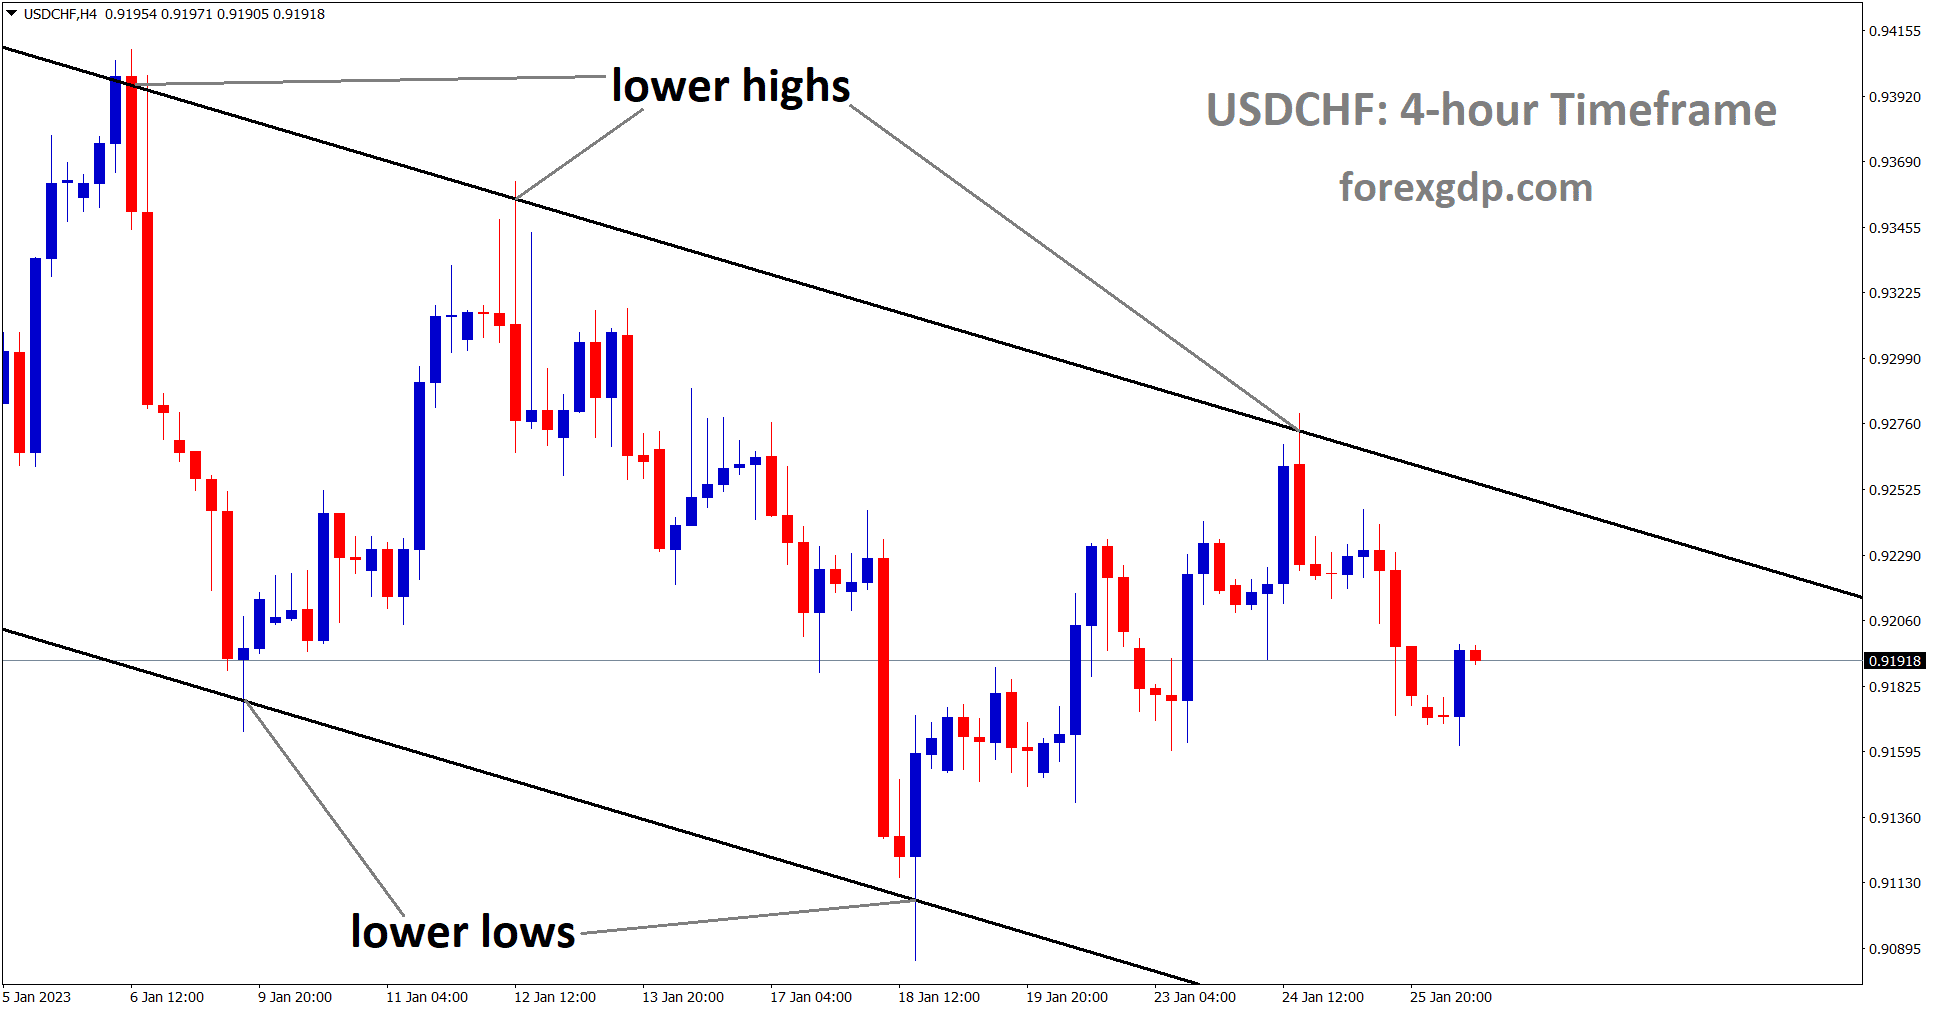 USDCHF is moving in the Descending Channel and the market has fallen from the lower high area of the channel.